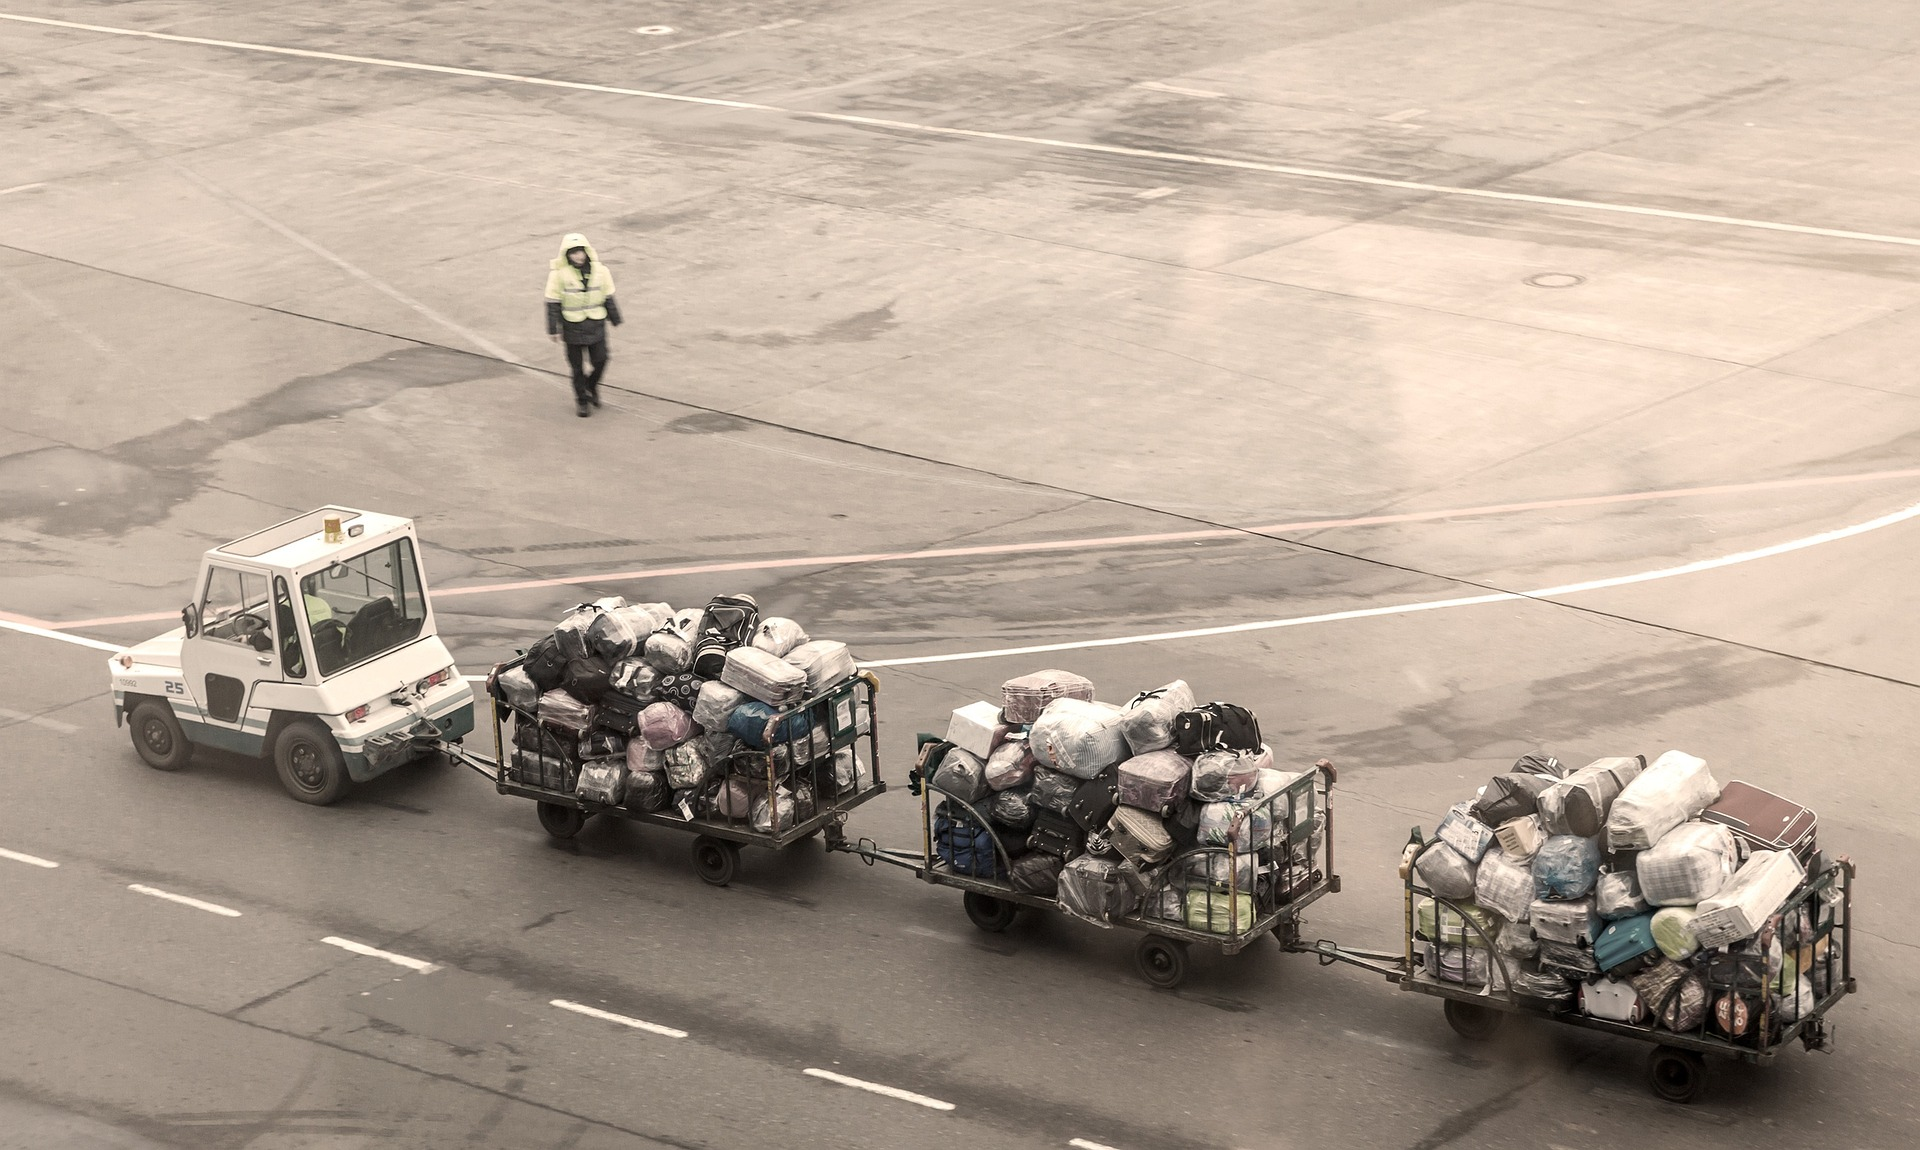 A small car towing carts full of checked-in luggage.